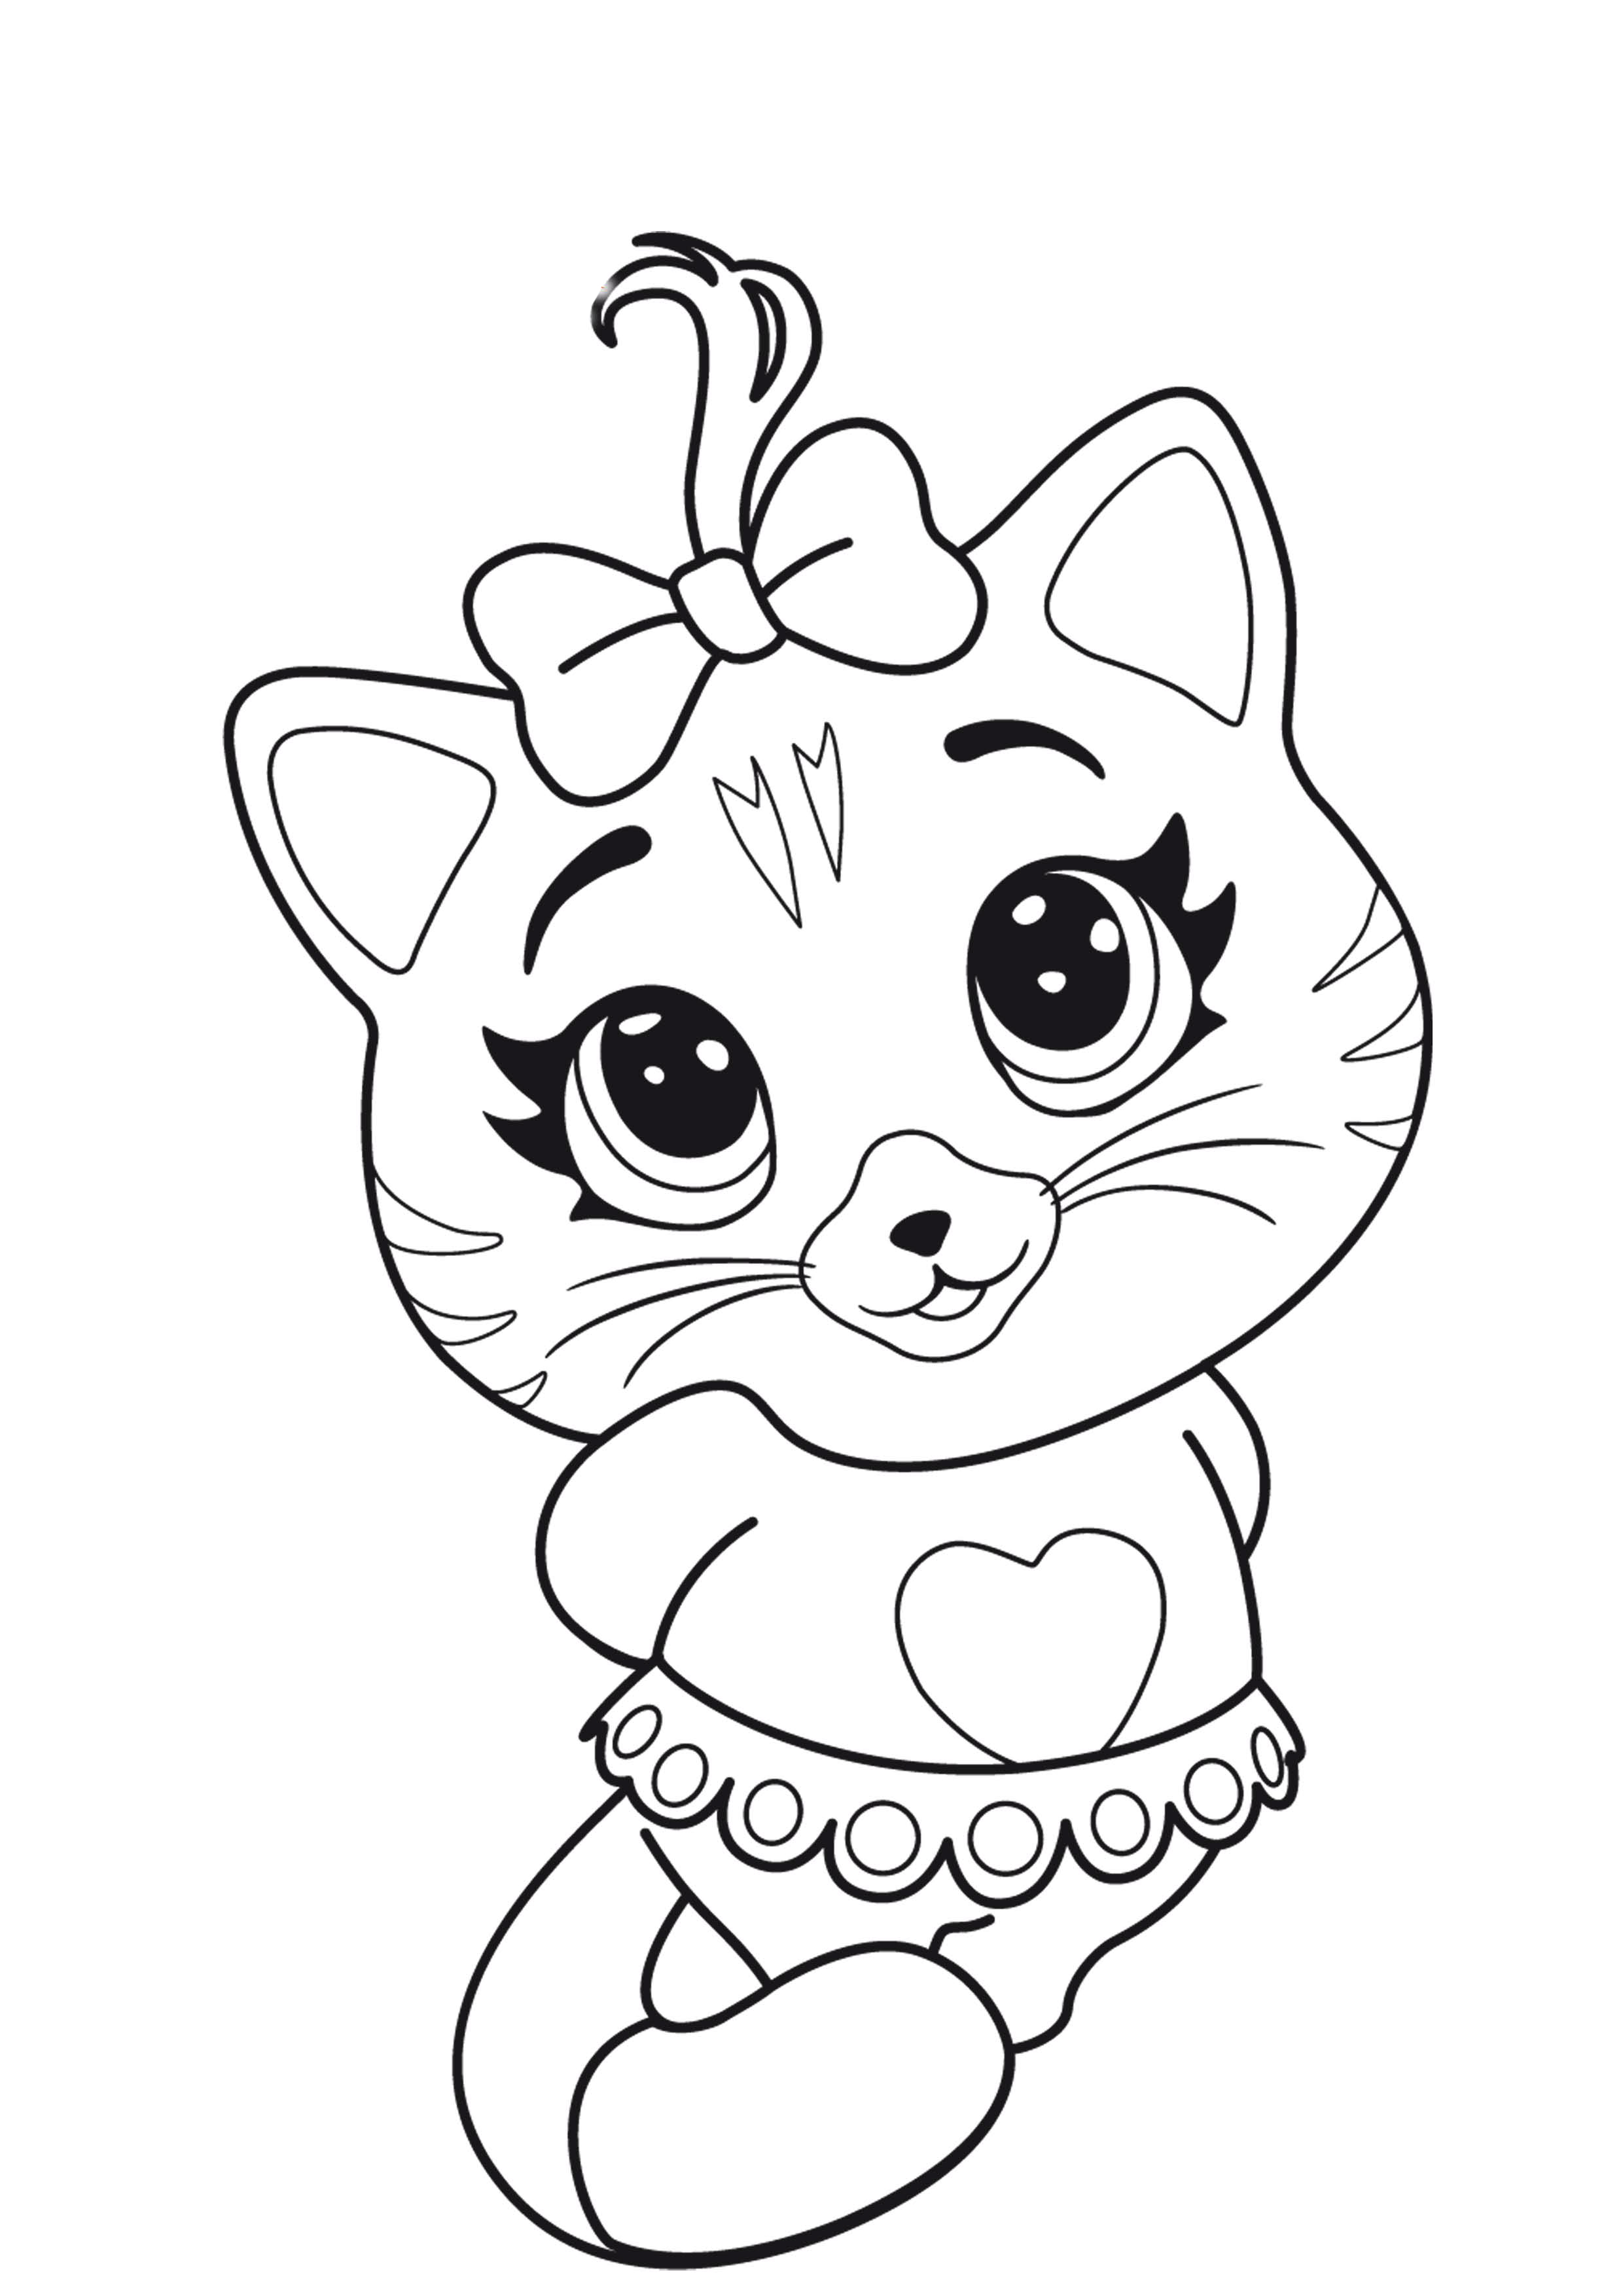 Cat Colouring Pages Printable Free